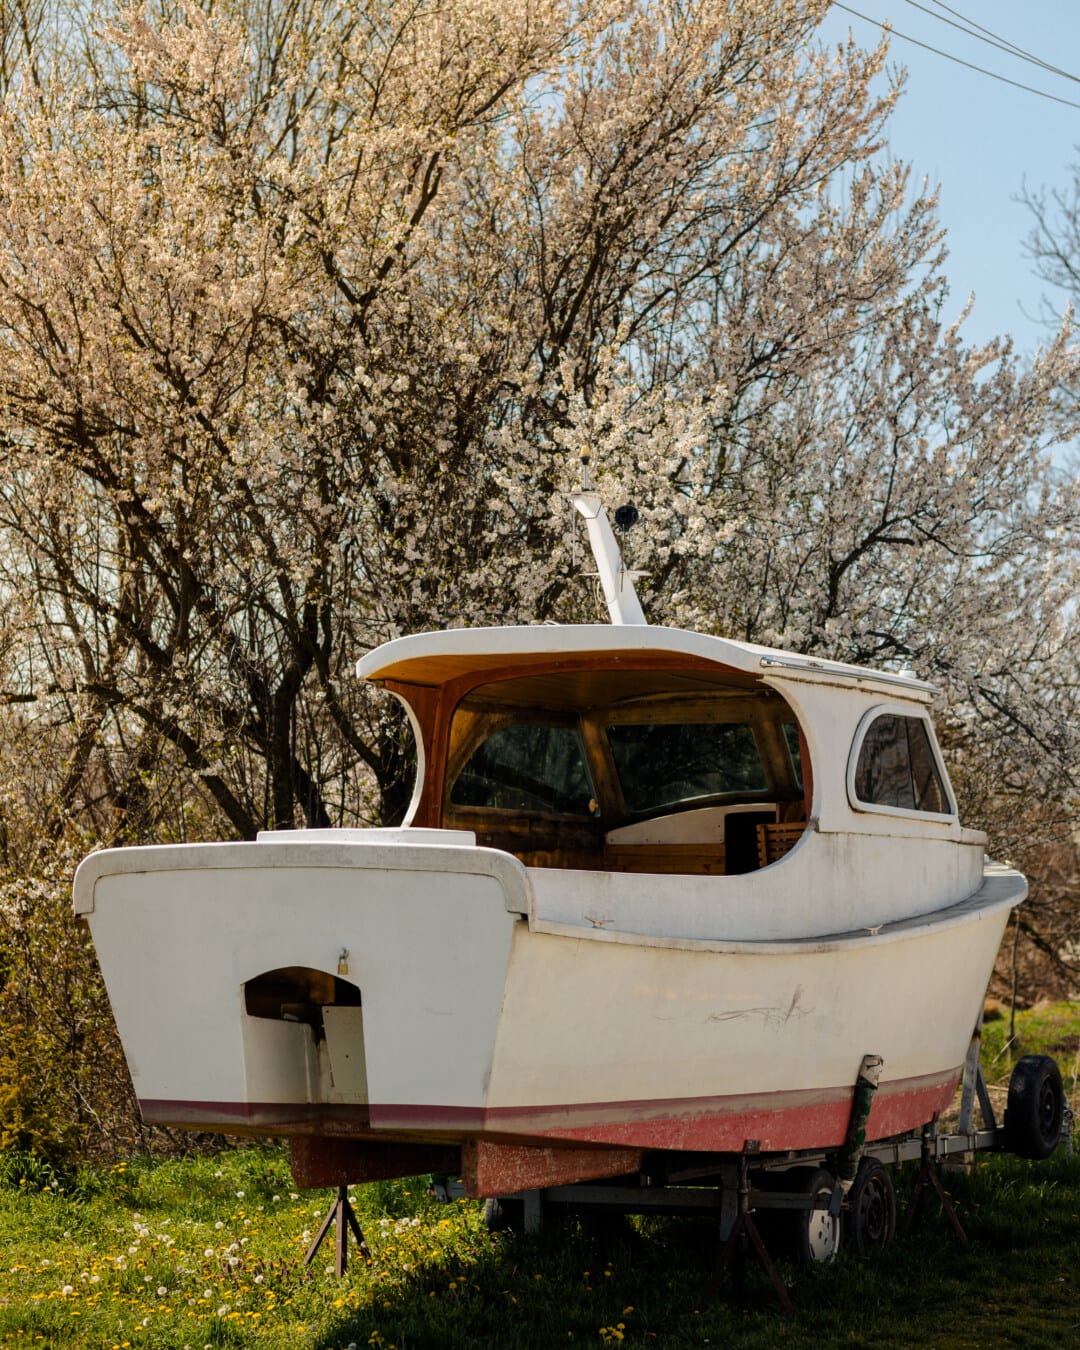 white, ship, small, repair, wooden, old, nature, vehicle, classic, transport